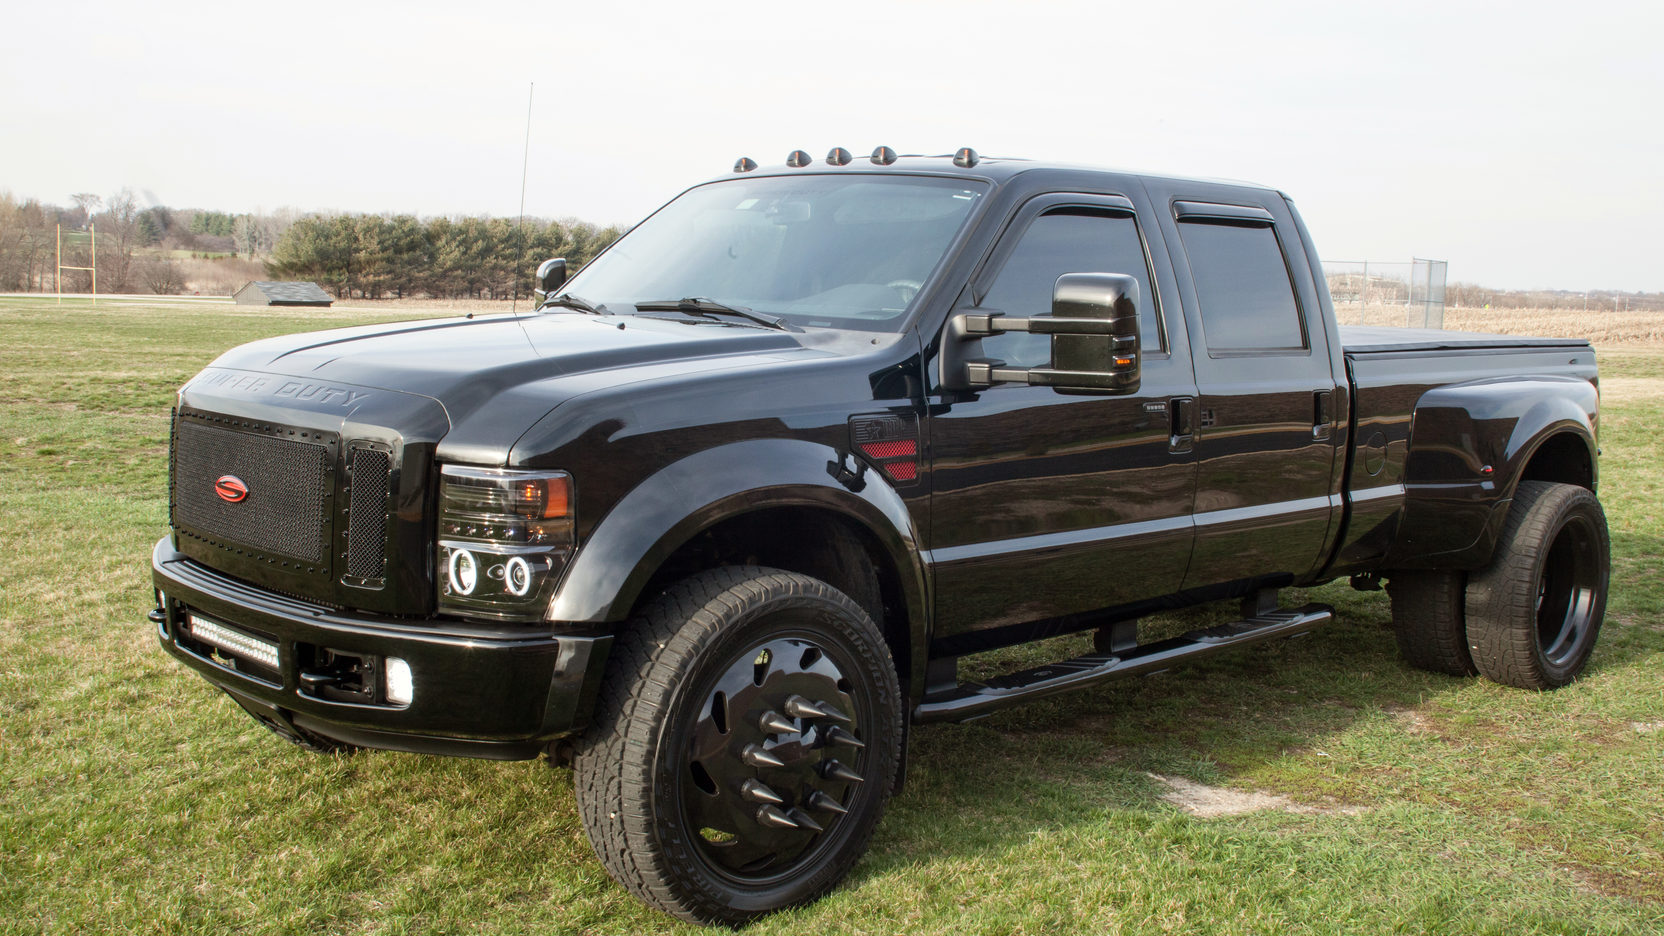 2008 Ford F450 Dually Pickup | S42 | Chicago 2014